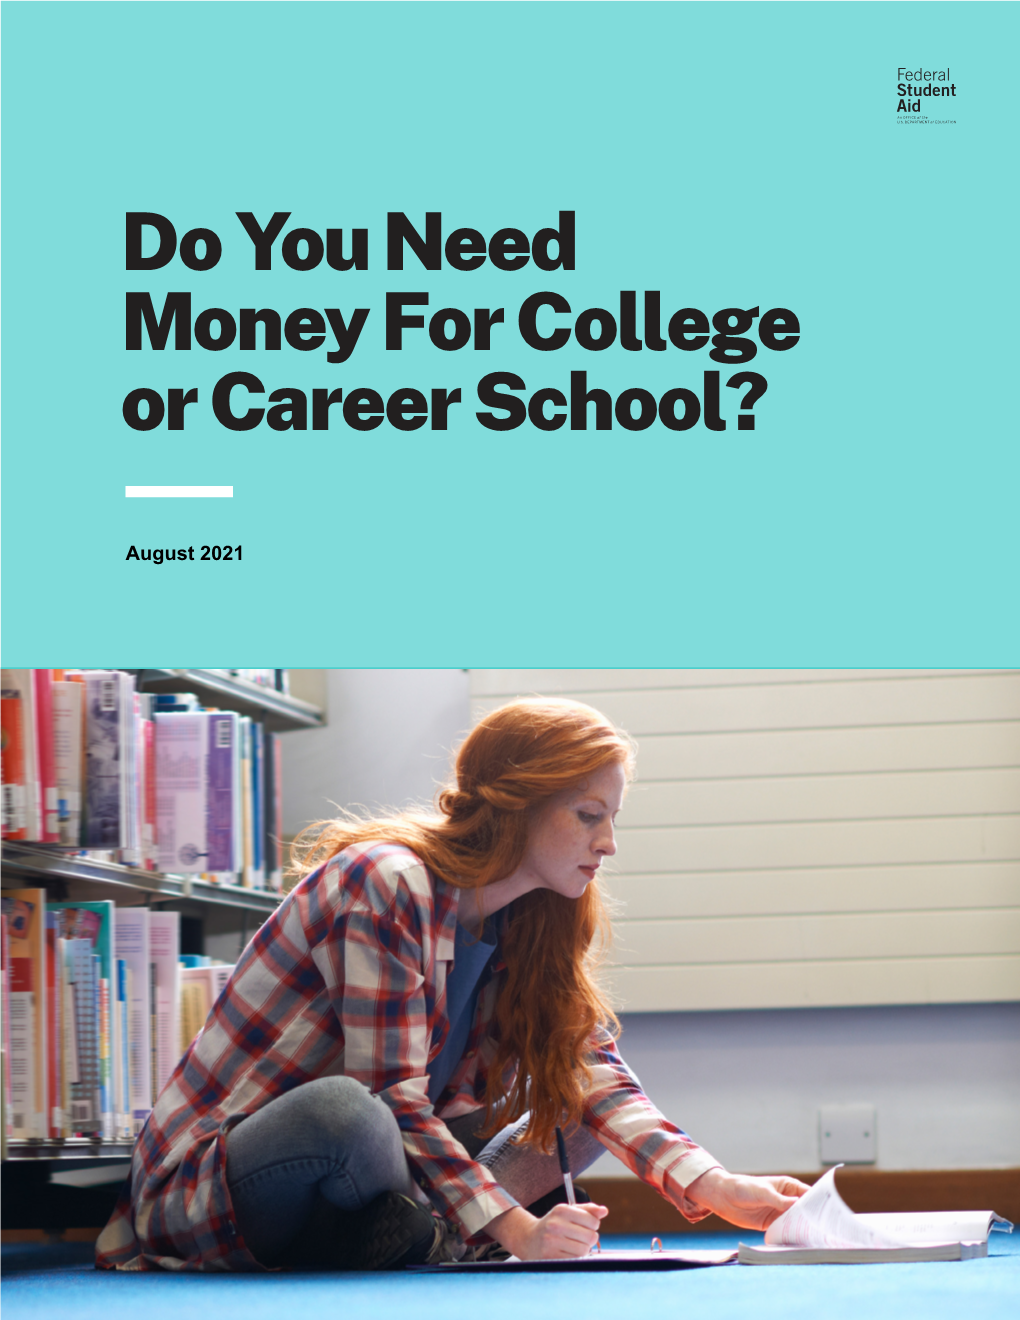 Do You Need Money for College Or Career School?